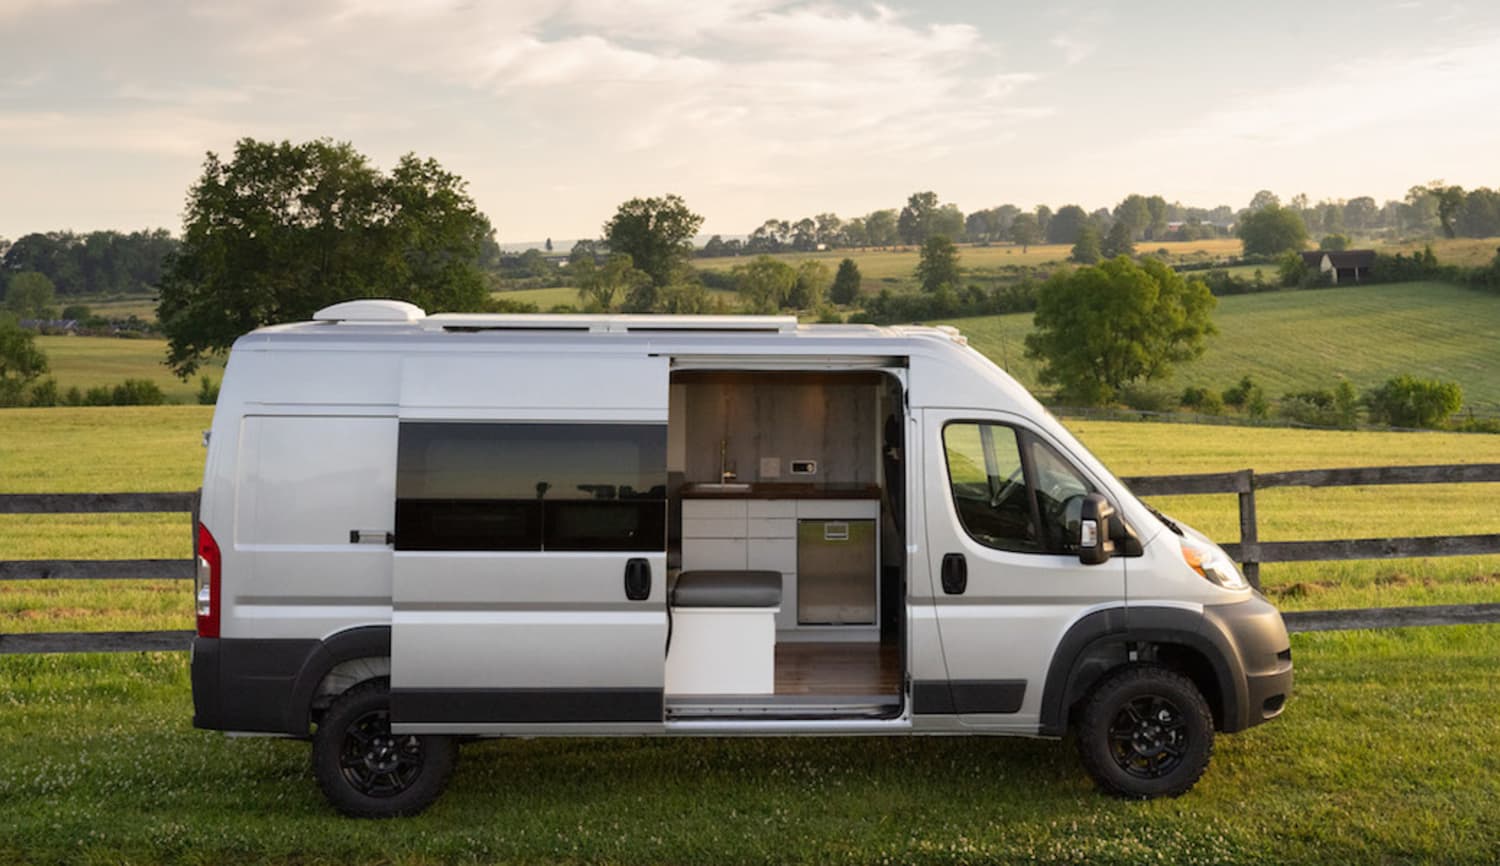 An Electric Camper Van Might Be the Living Space of an Adventurer’s Dreams